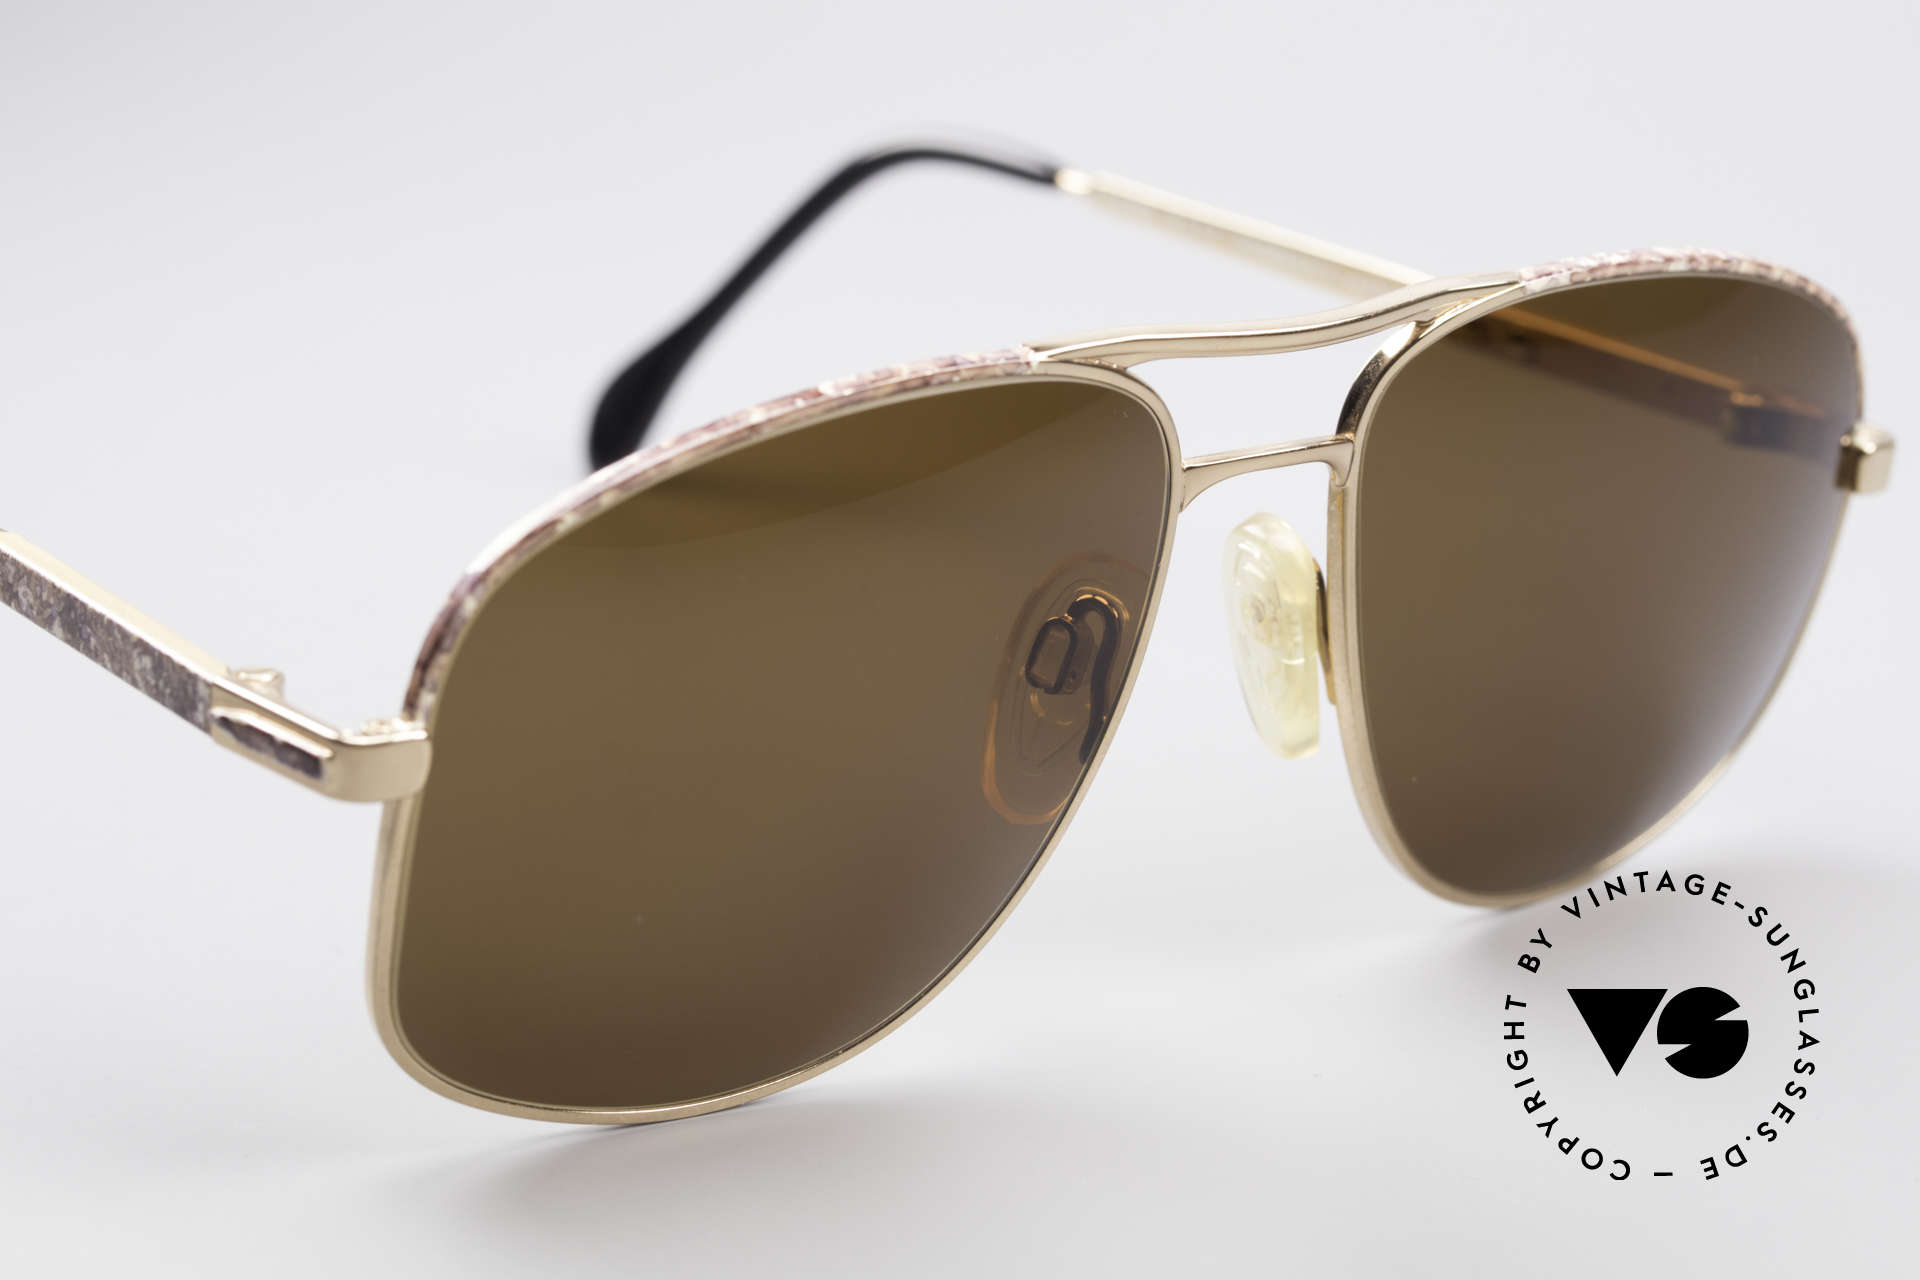 Zollitsch Cadre 8 18k Gold Plated Sunglasses, unworn (like all our rare vintage Zollitsch sunglasses), Made for Men